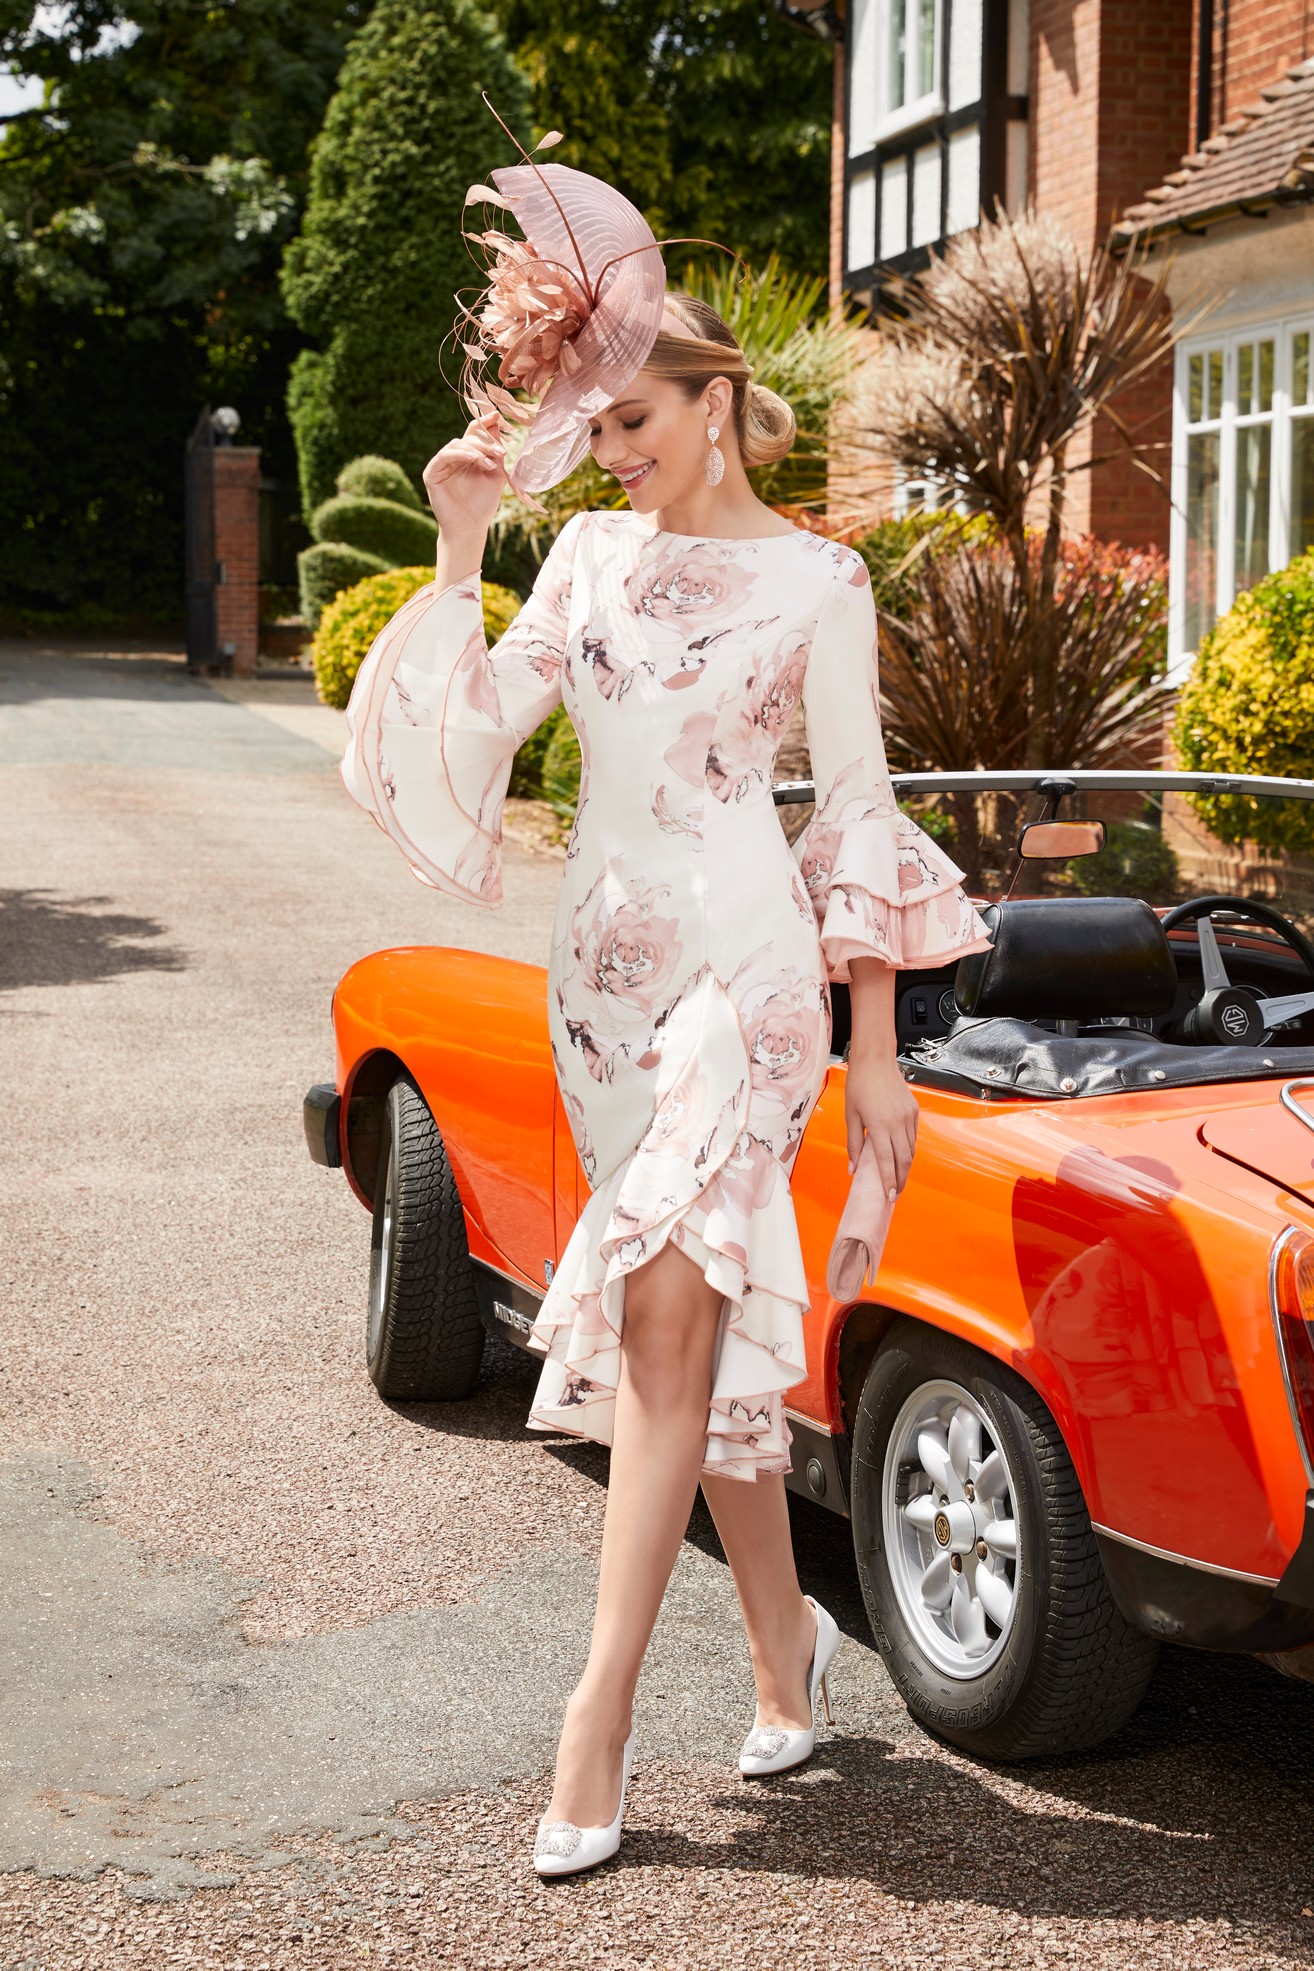 Blonde lady standing in front of red vintage car wearing pink and ivory floral occasion dress with ruffle sleeves and high neckline and matching white high heeled shoes and clutch bag